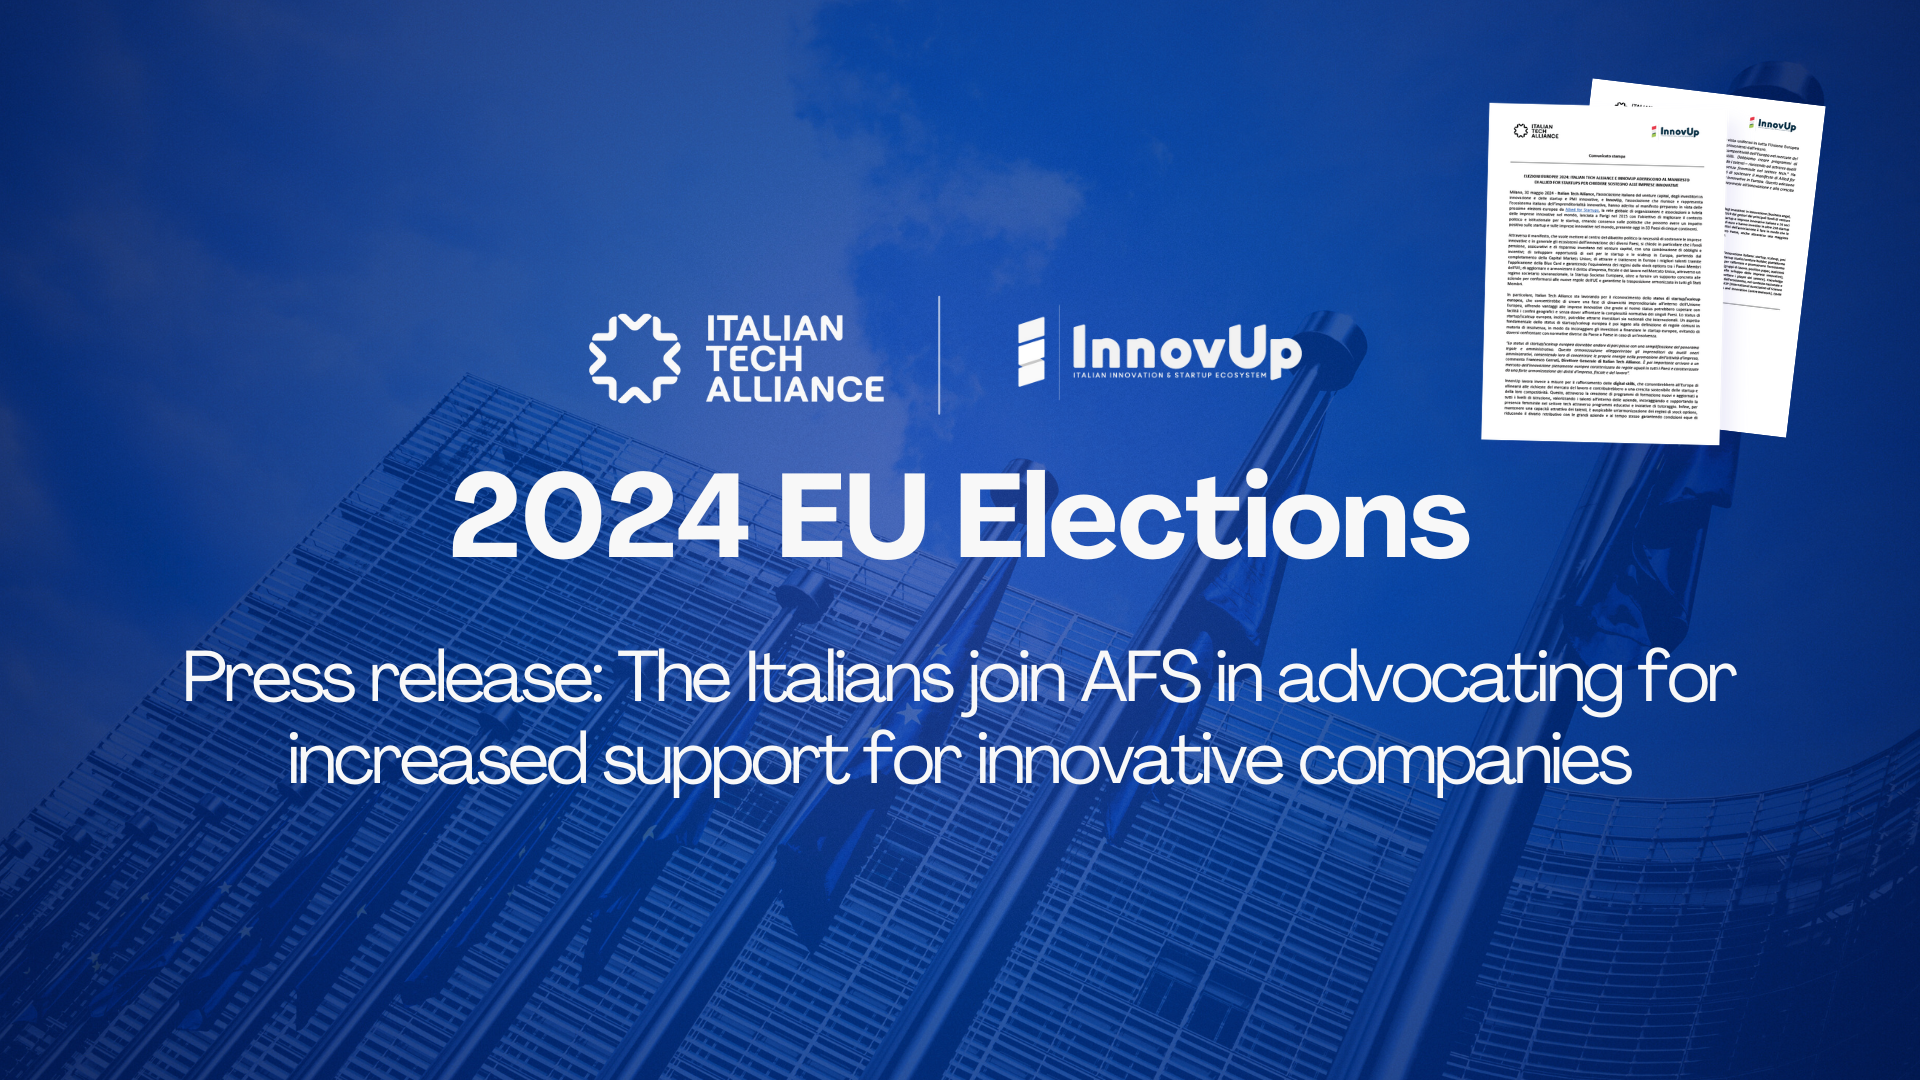 The Italians join AFS in advocating for increased support for innovative companies across Europe